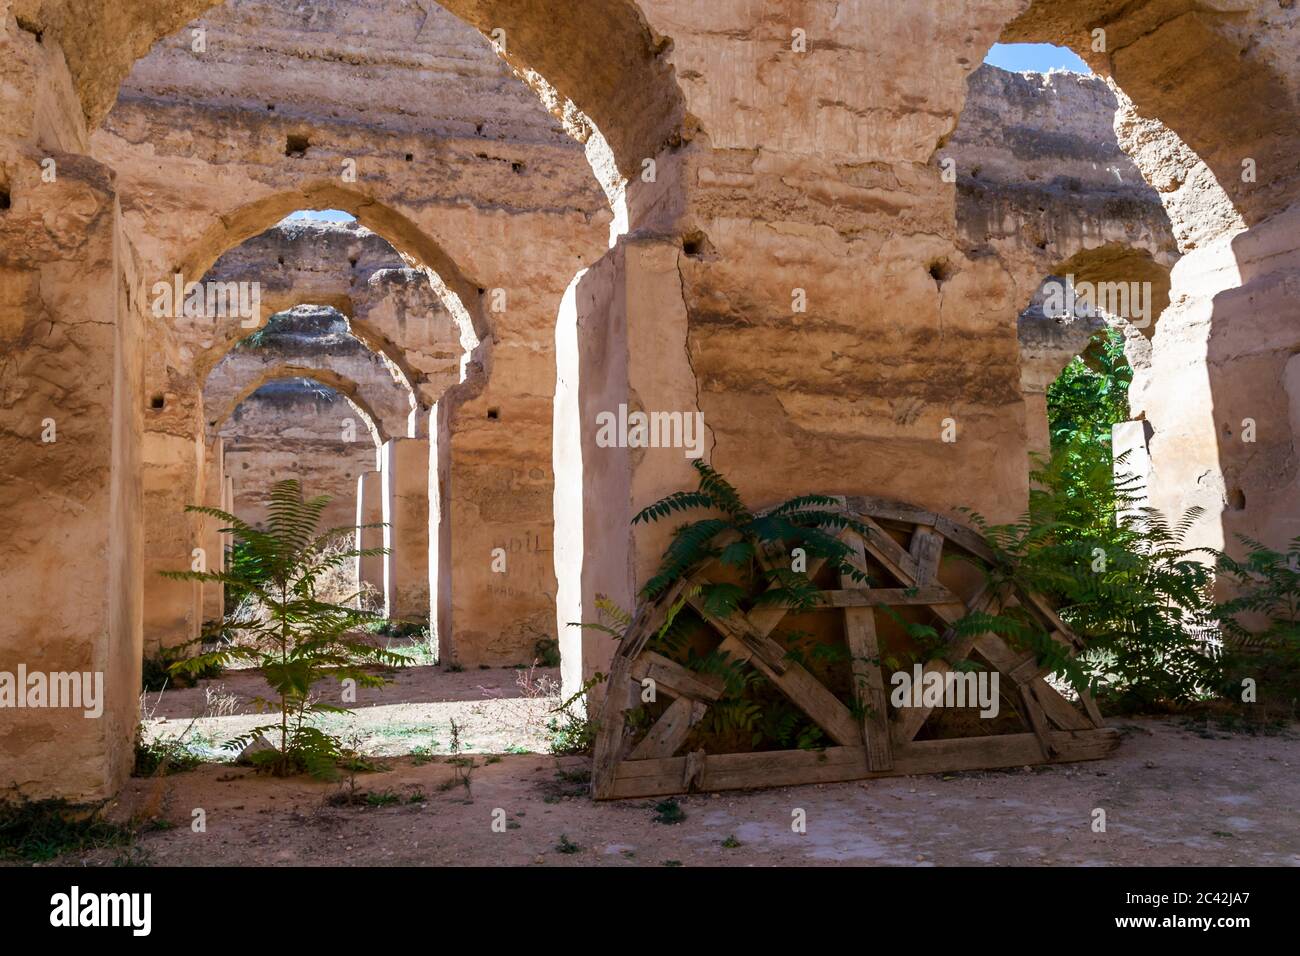 Wooden arch structure for the round arches in the stables of Heri es-Souani. The building complex belongs to the UNESCO World Heritage Site. The Heri es-Souani building complex is a UNESCO World Heritage Site in Meknes, Morocco Stock Photo